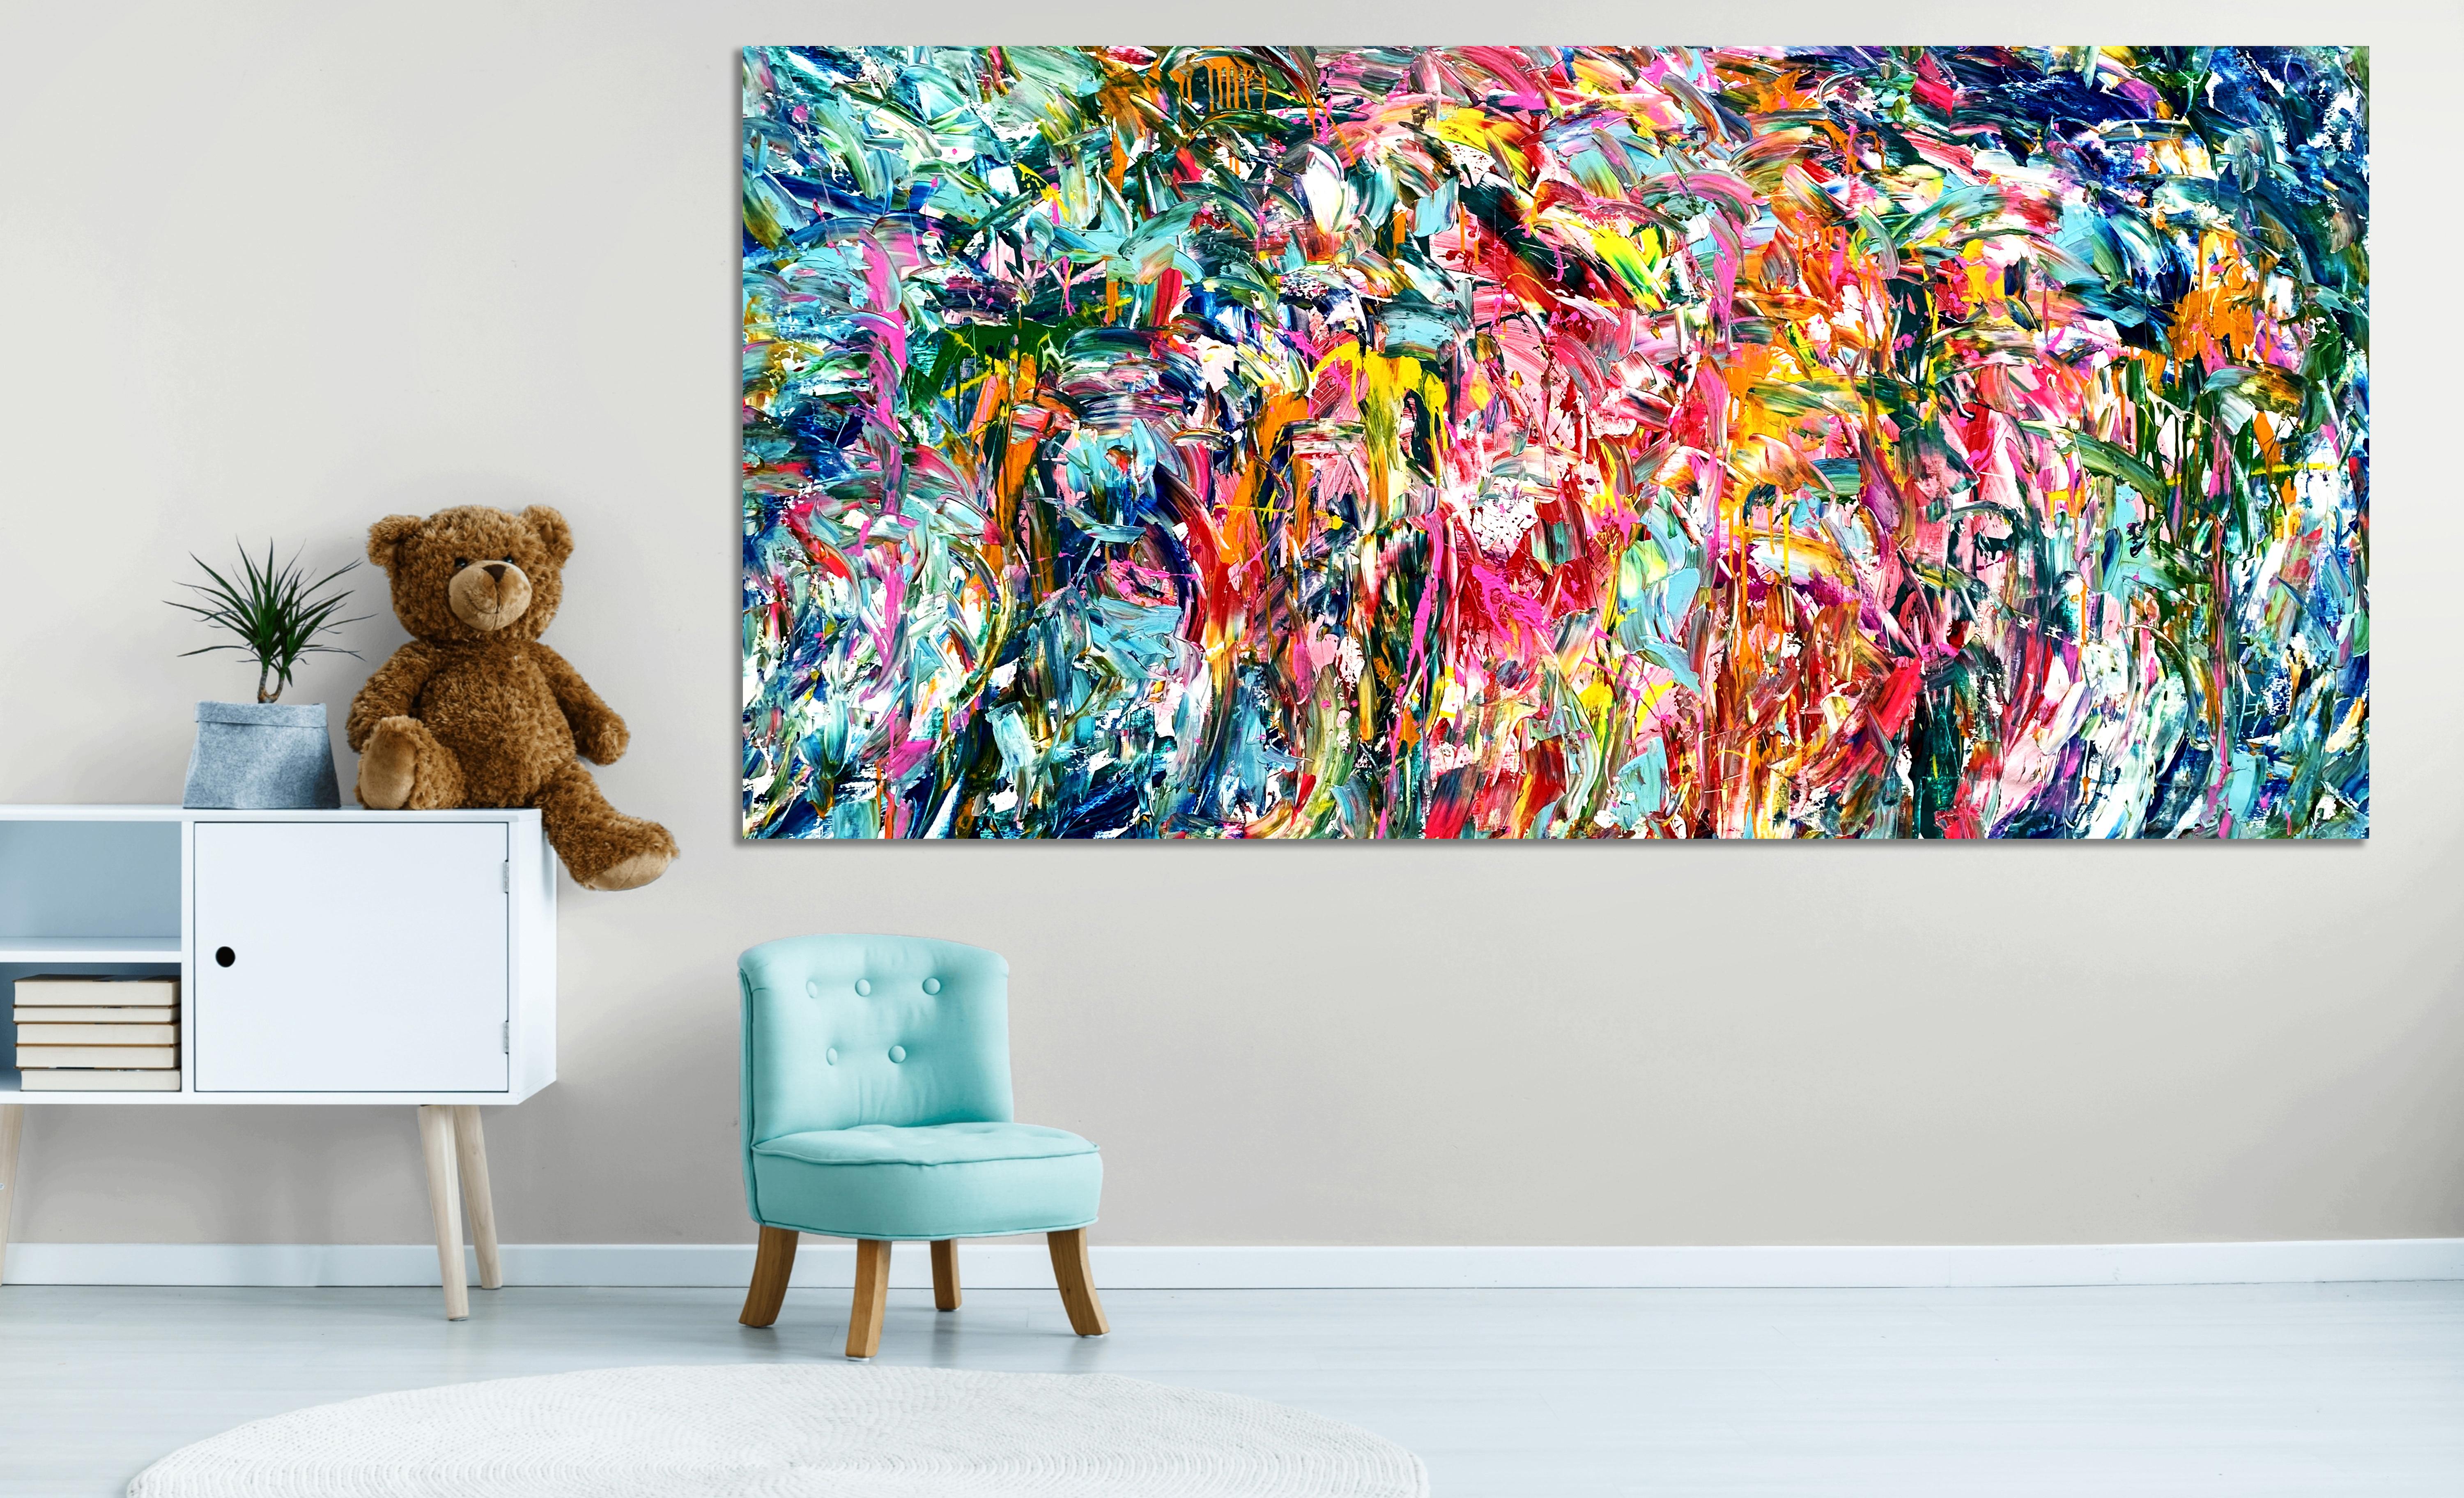 Freedom has a Price - Abstract Expressionist Painting by Estelle Asmodelle